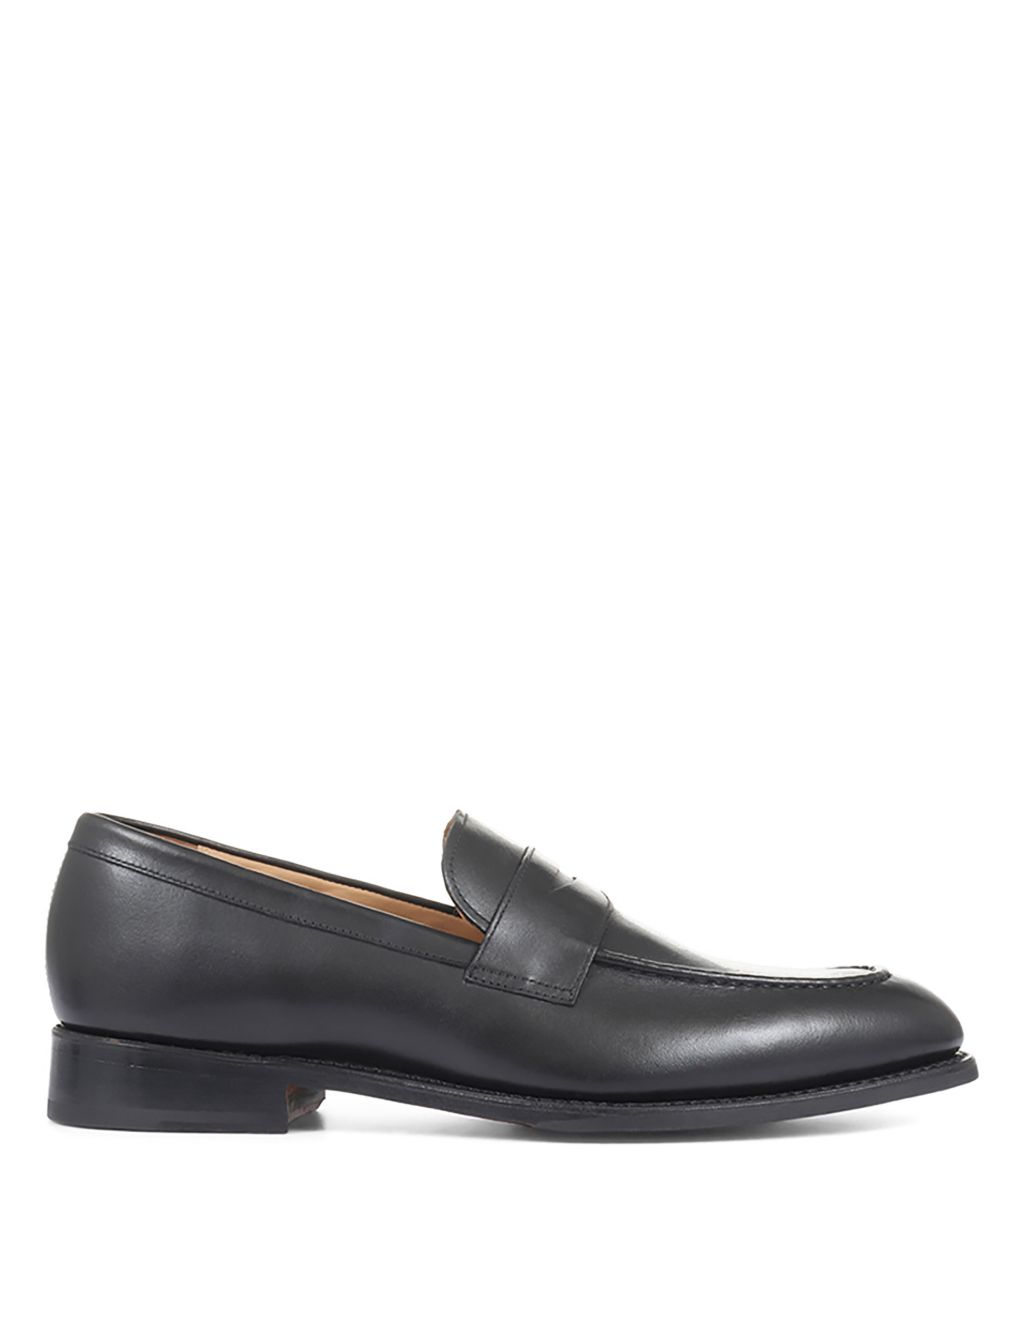 Leather Goodyear Welted Slip-On Loafers image 4